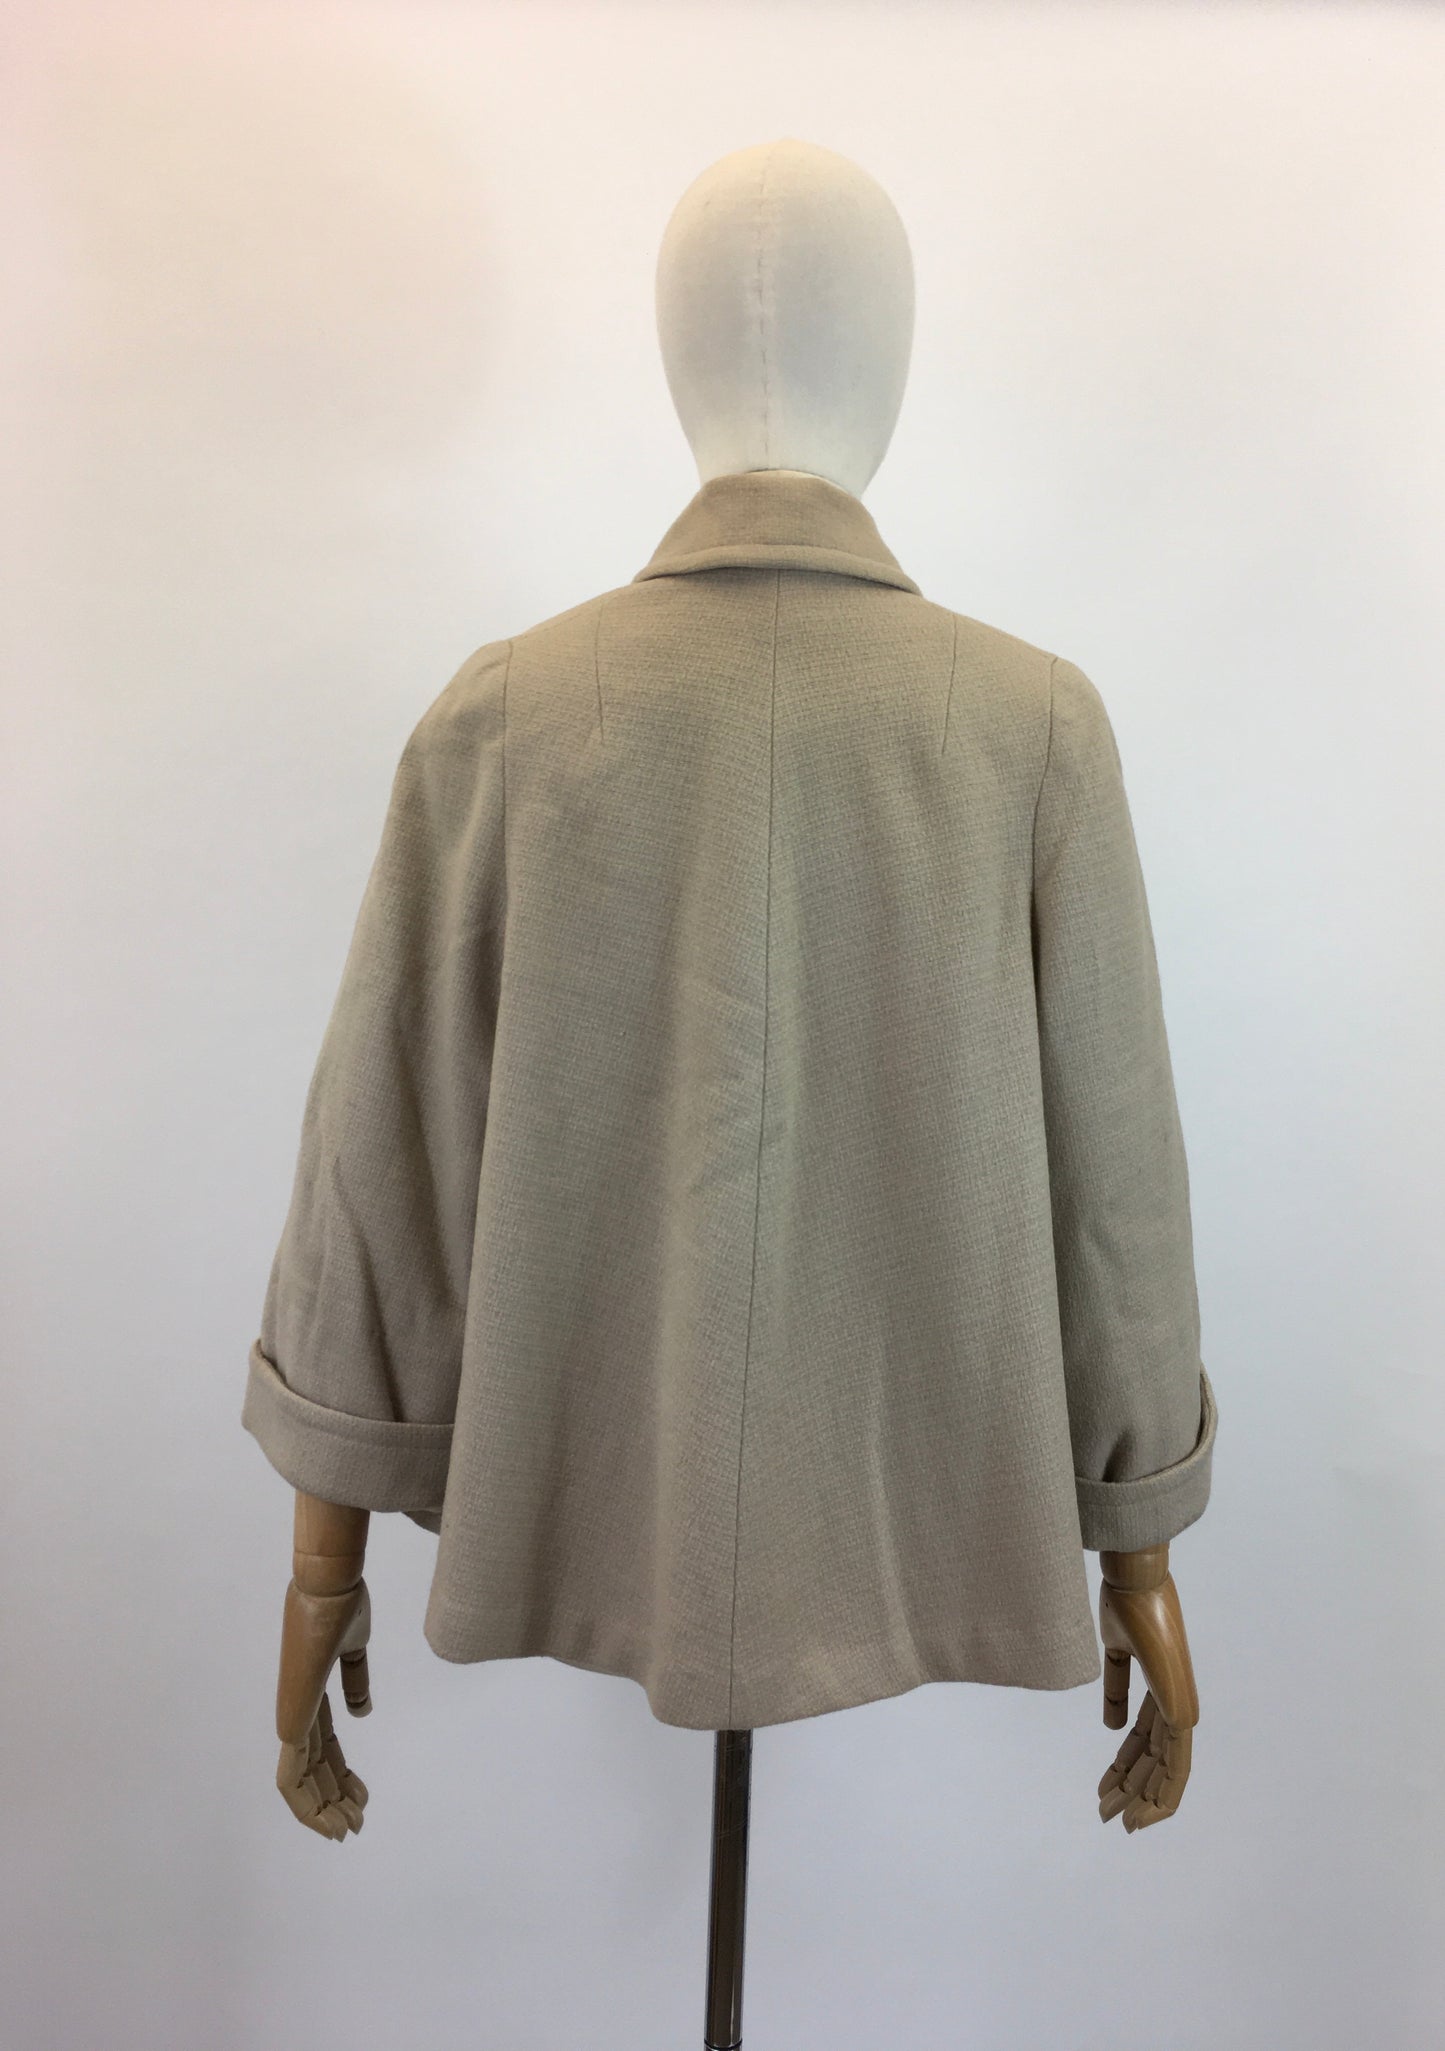 Original 1940’s swagger Jacket - in calming fawn